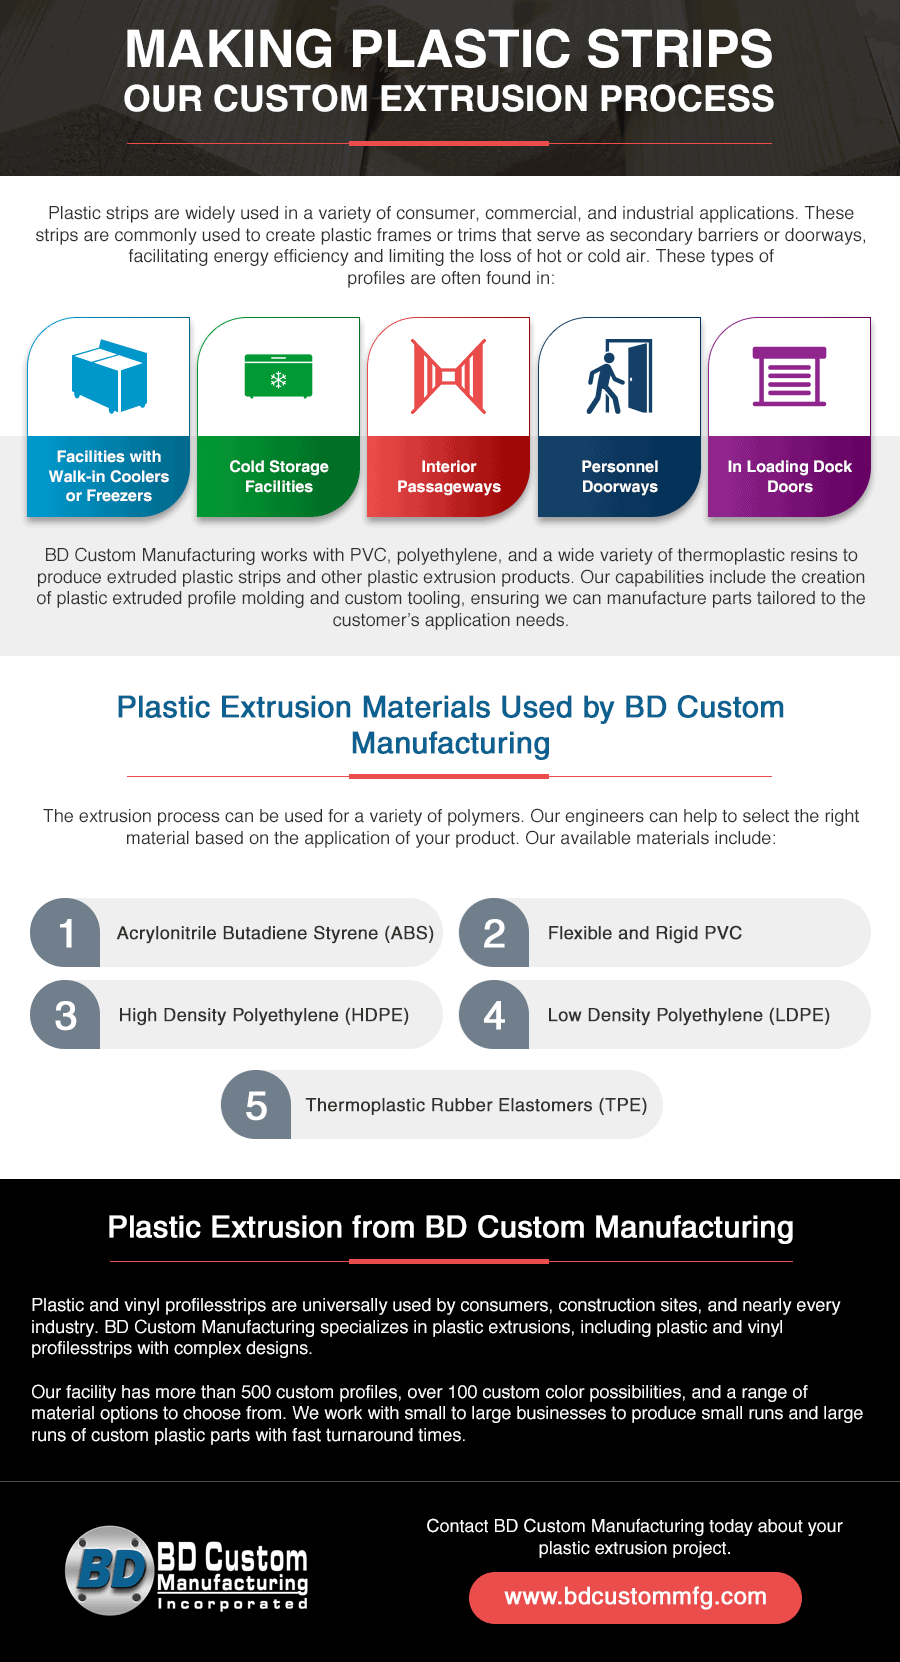 Making Plastic Strips: Our Custom Extrusion Process